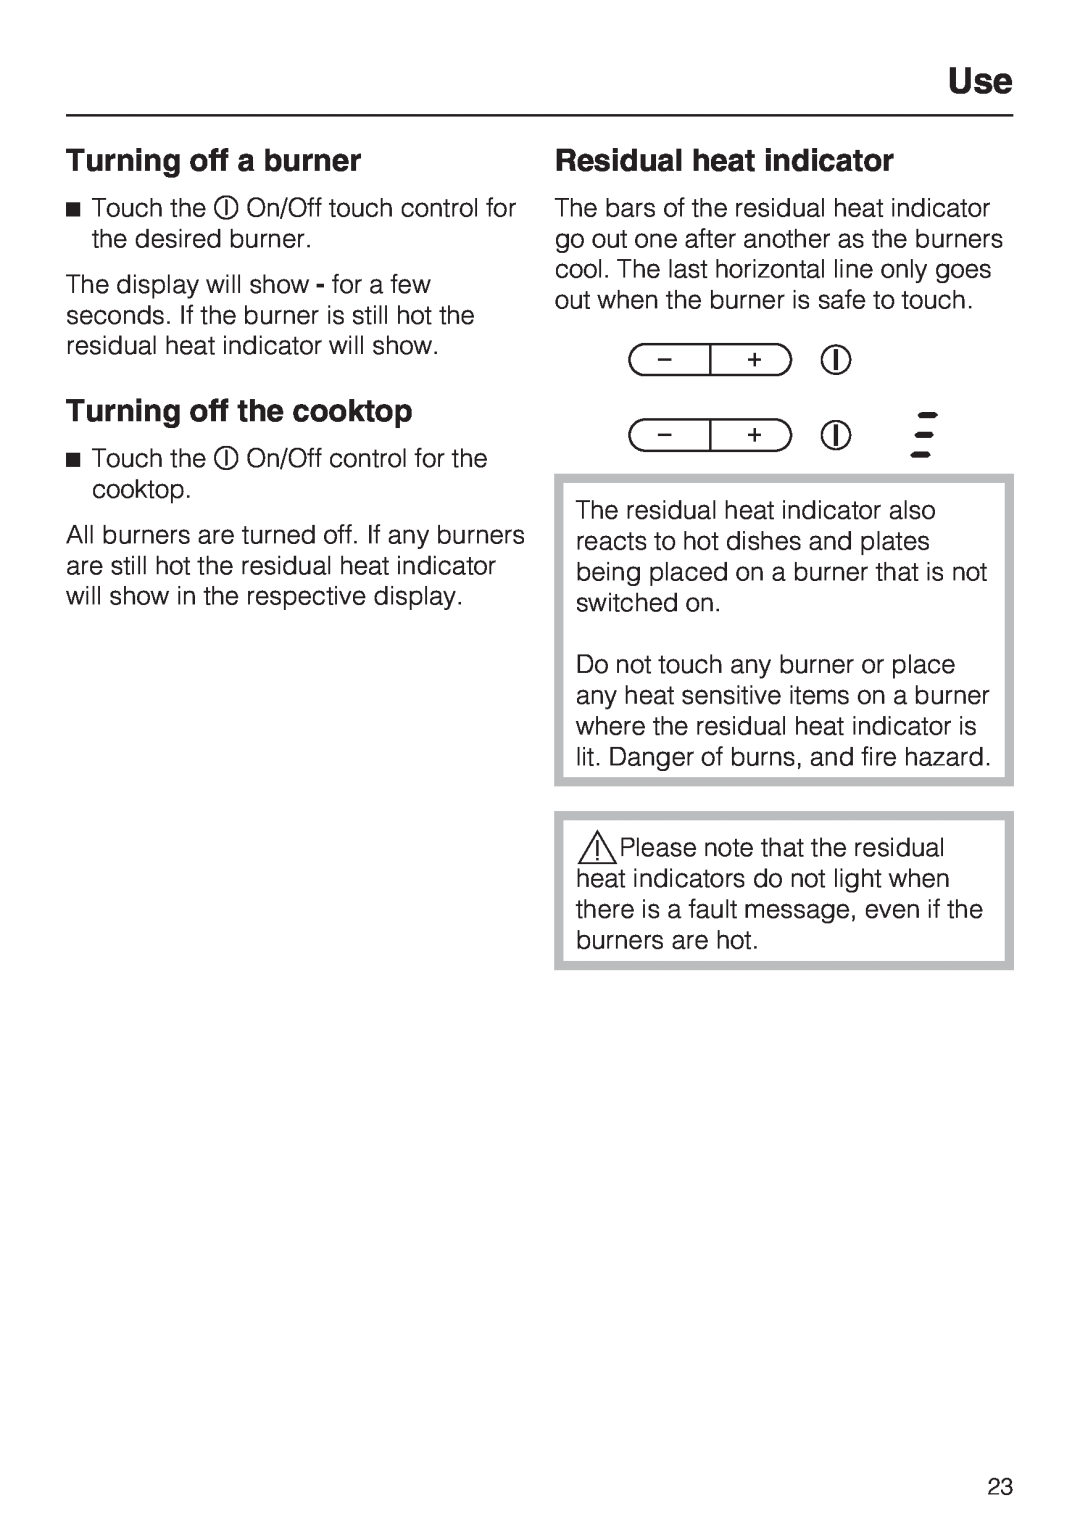 Miele KM 5753 installation instructions Turning off a burner, Turning off the cooktop, Residual heat indicator 